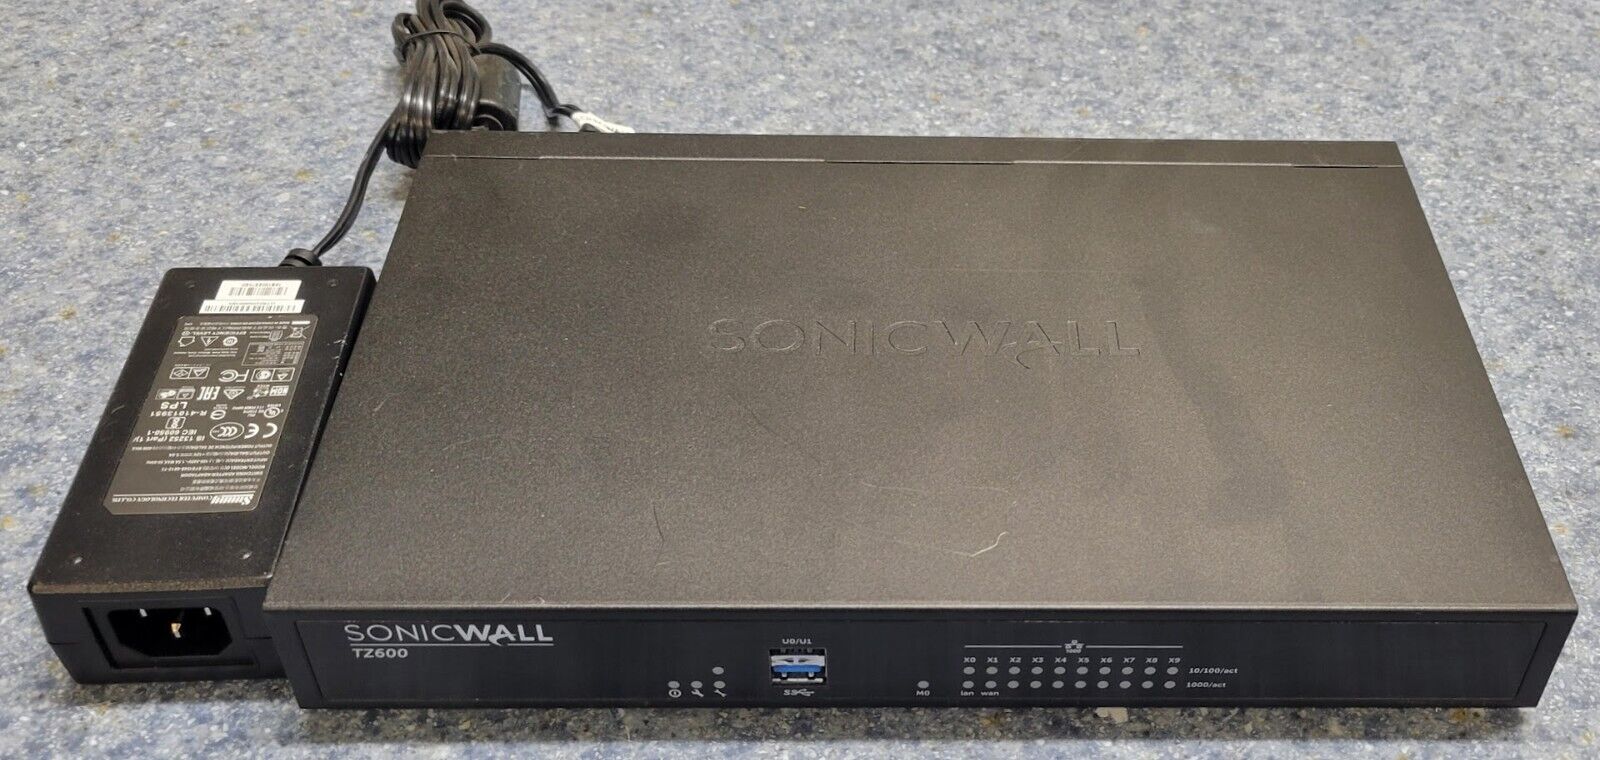 Sonicwall TZ600 Firewall Network Security Router /w Power Cord